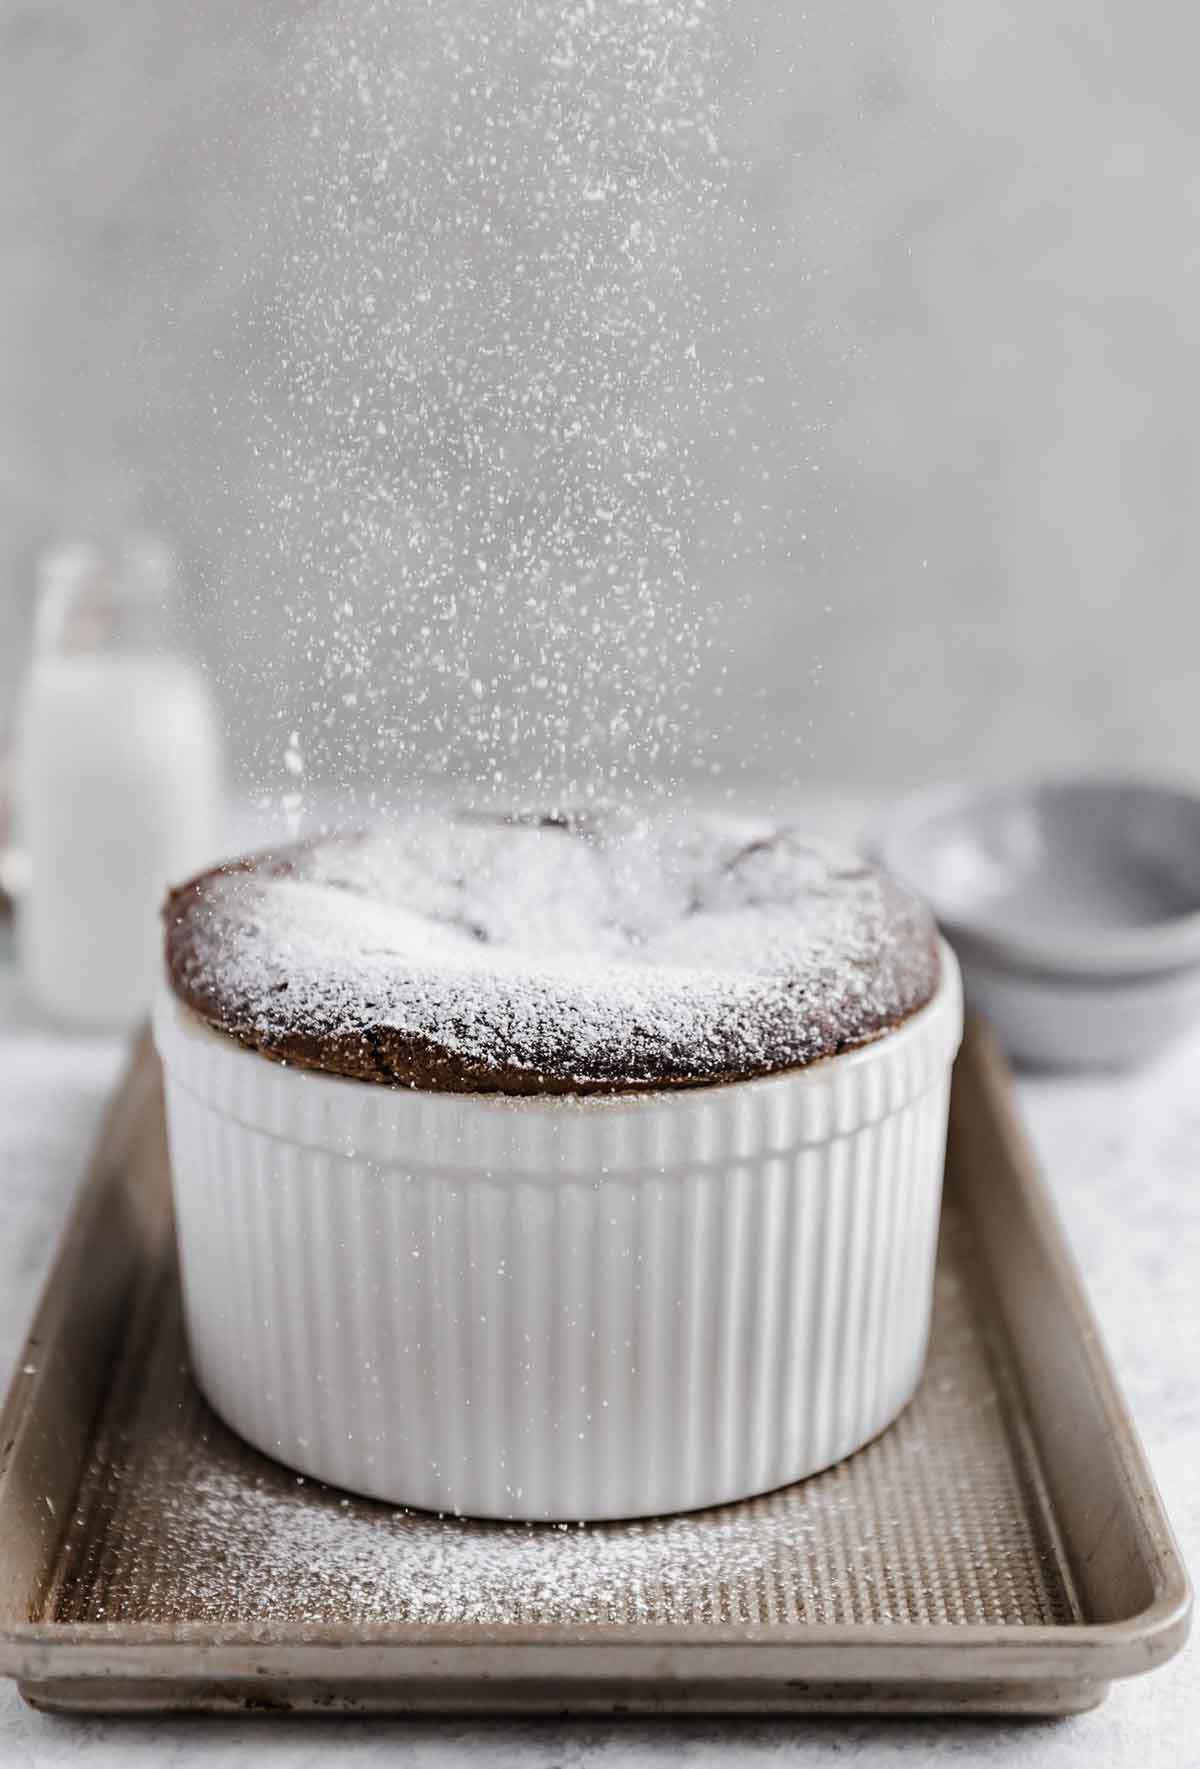 Photo of chocolate souffle being sprinkled with a large dusting of powdered sugar.